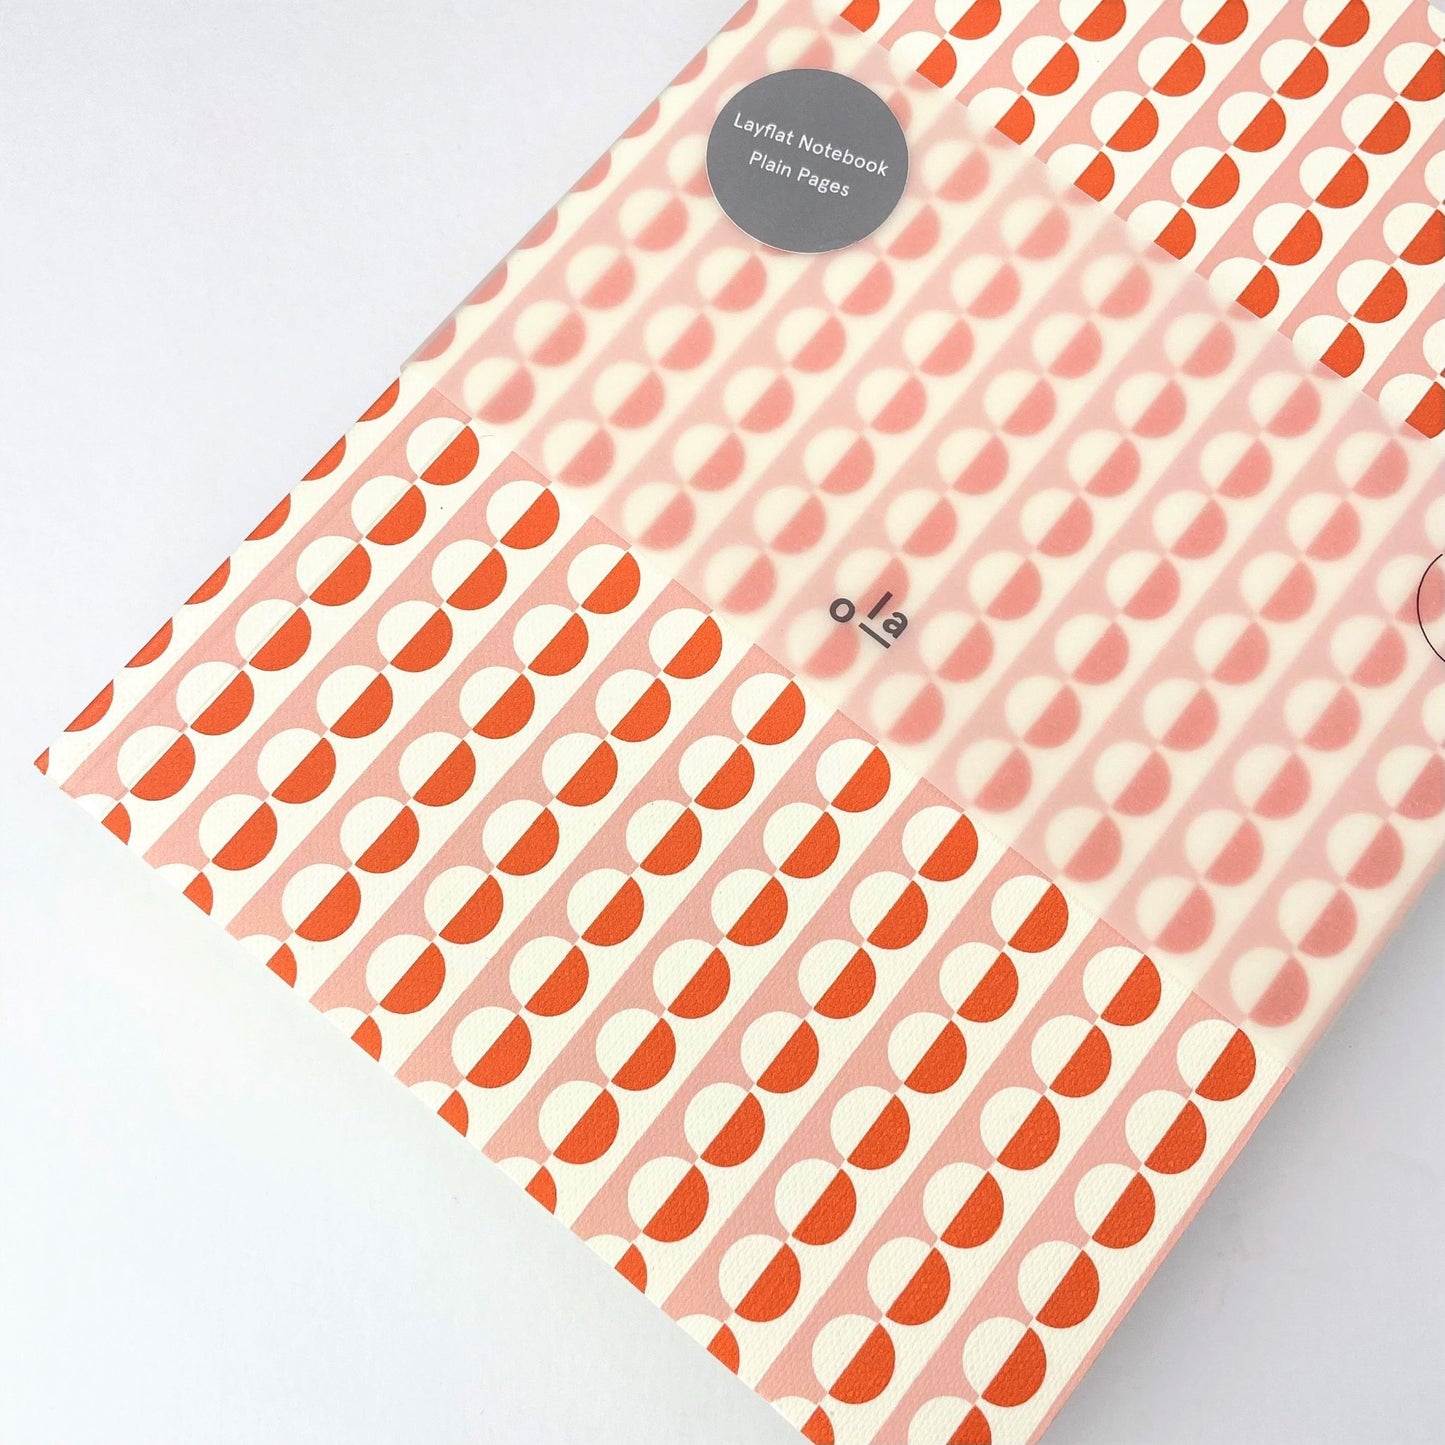 A5 softback notebook with geometric orange and pink repeat circle patterned cover. Plain inner pages, pictured with branded belly band